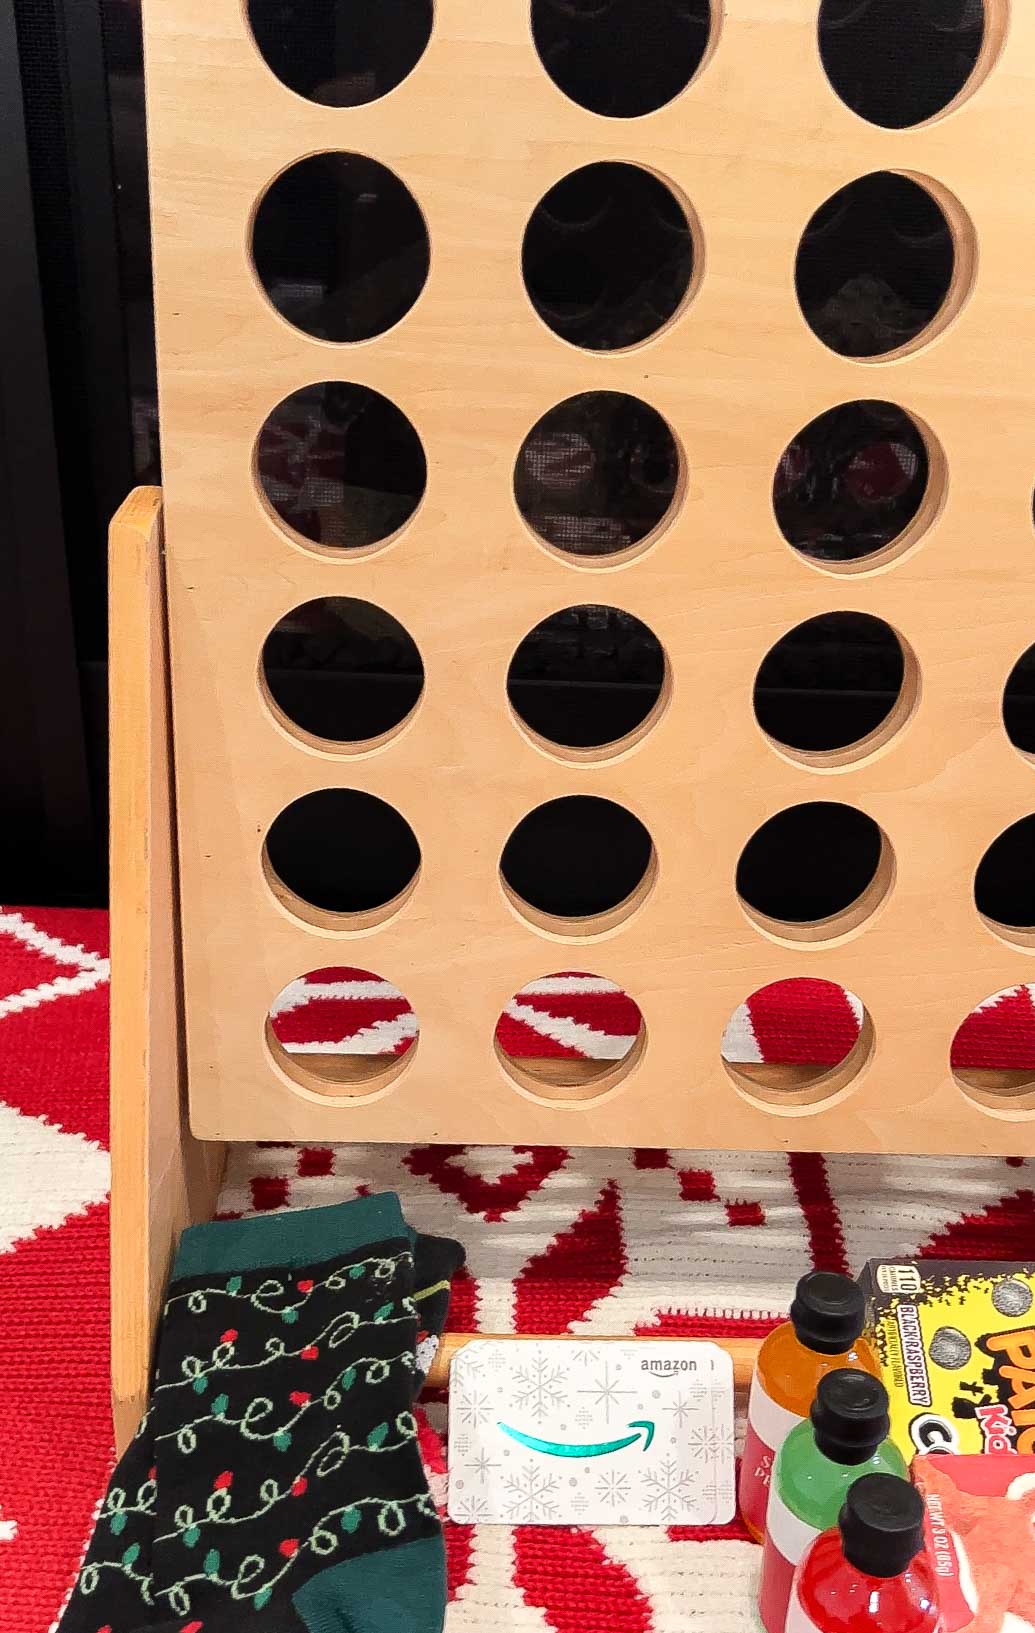 connect four game with prizes below